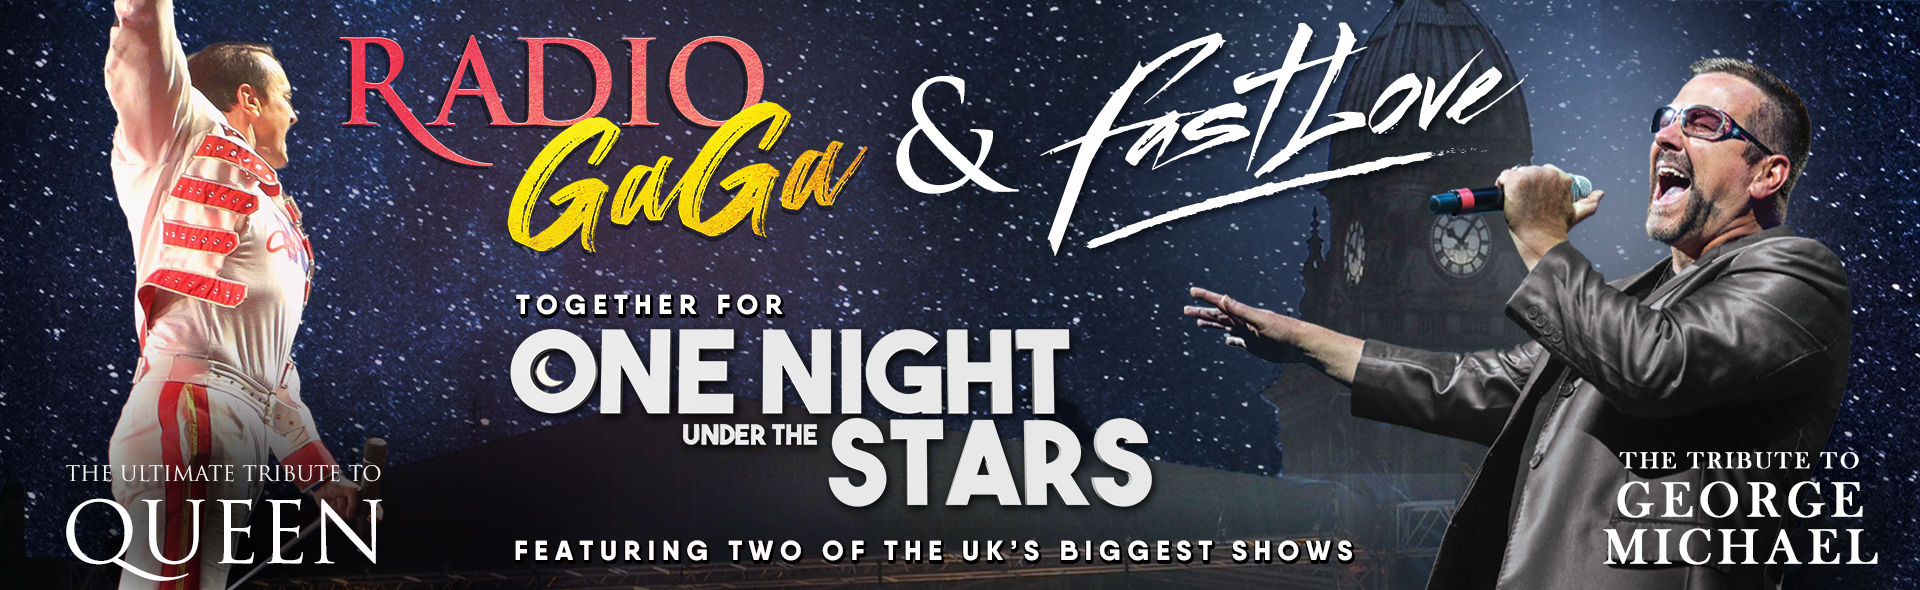 Radio Gaga & Fastlove – Together for One Night Under the Stars